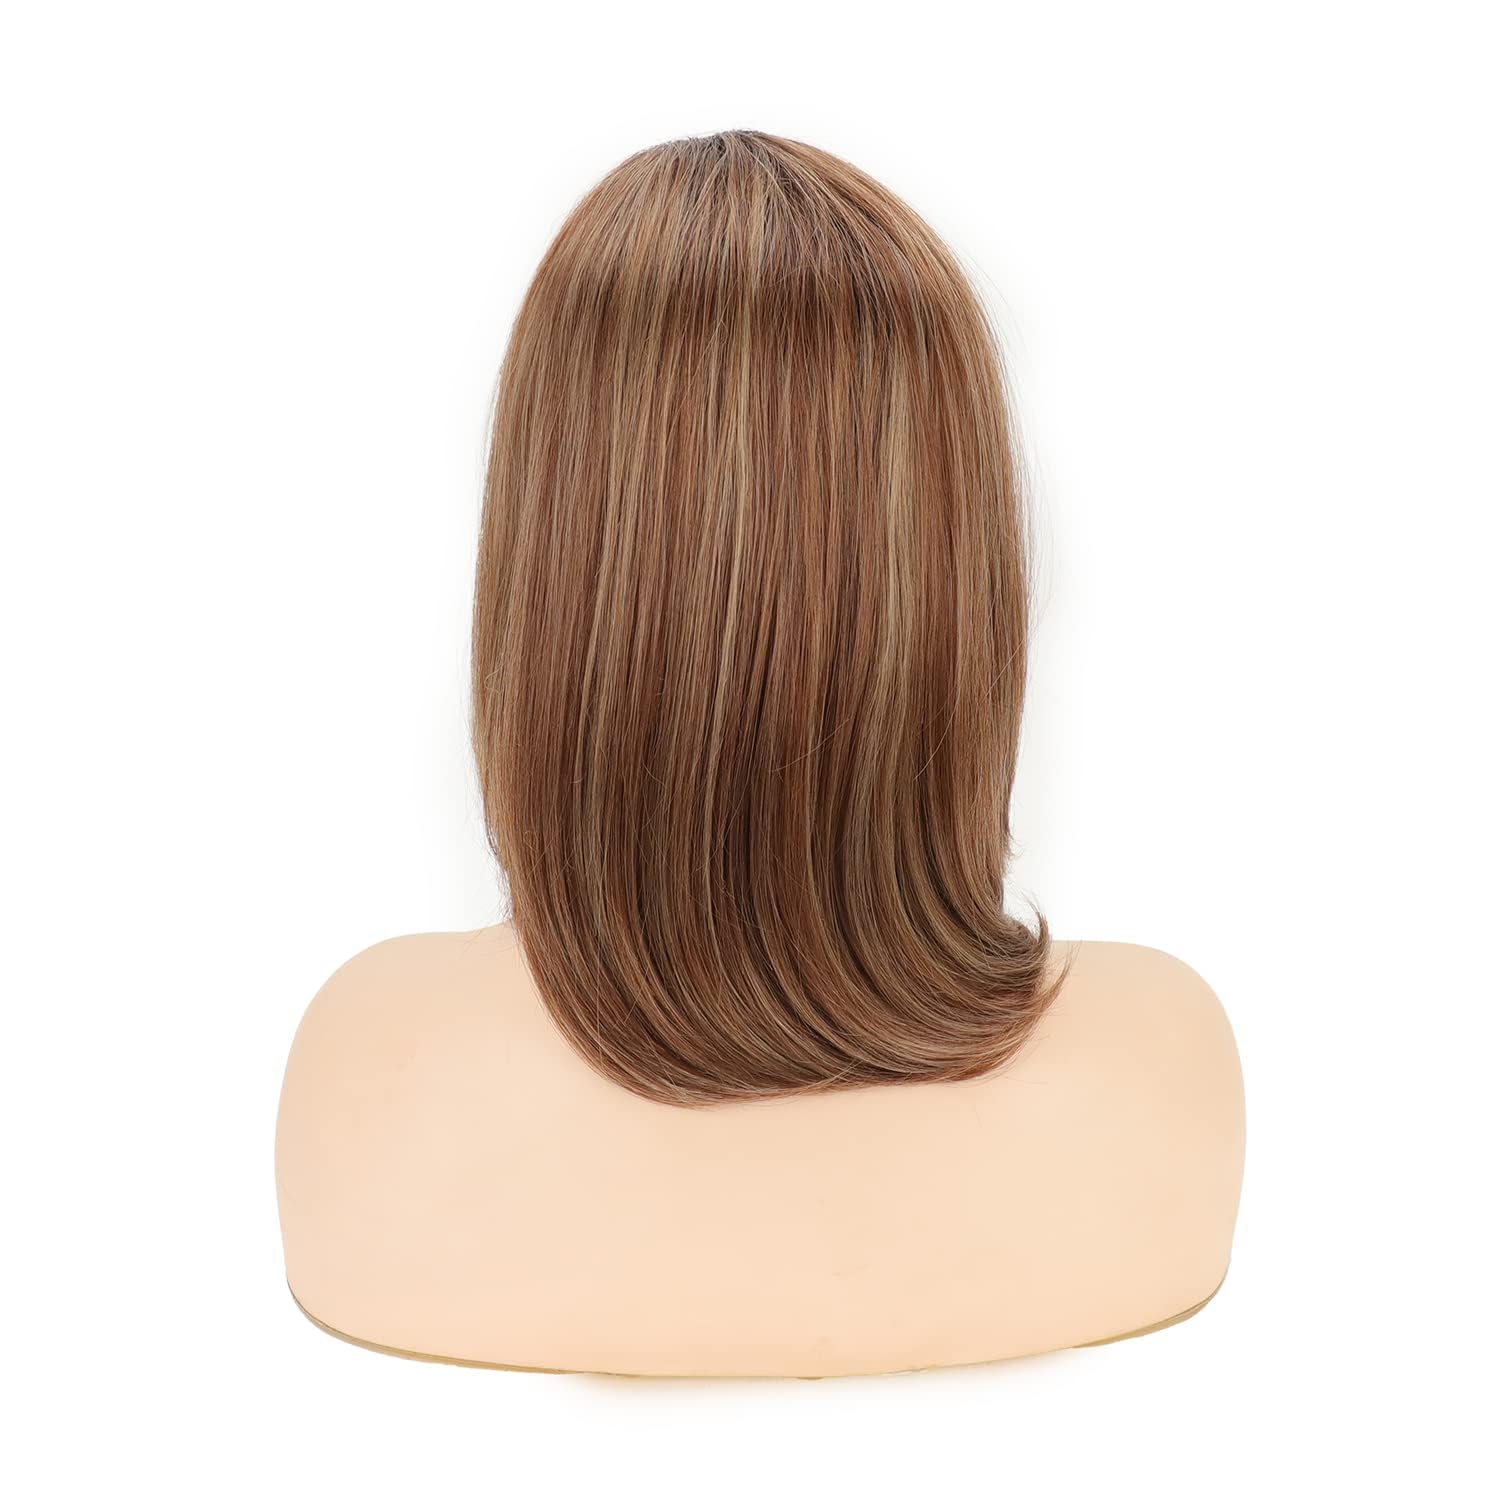  Short Blonde Highlight Bob Wig with Bangs Dark Roots Strawberry Blonde Straight Wigs for White Women